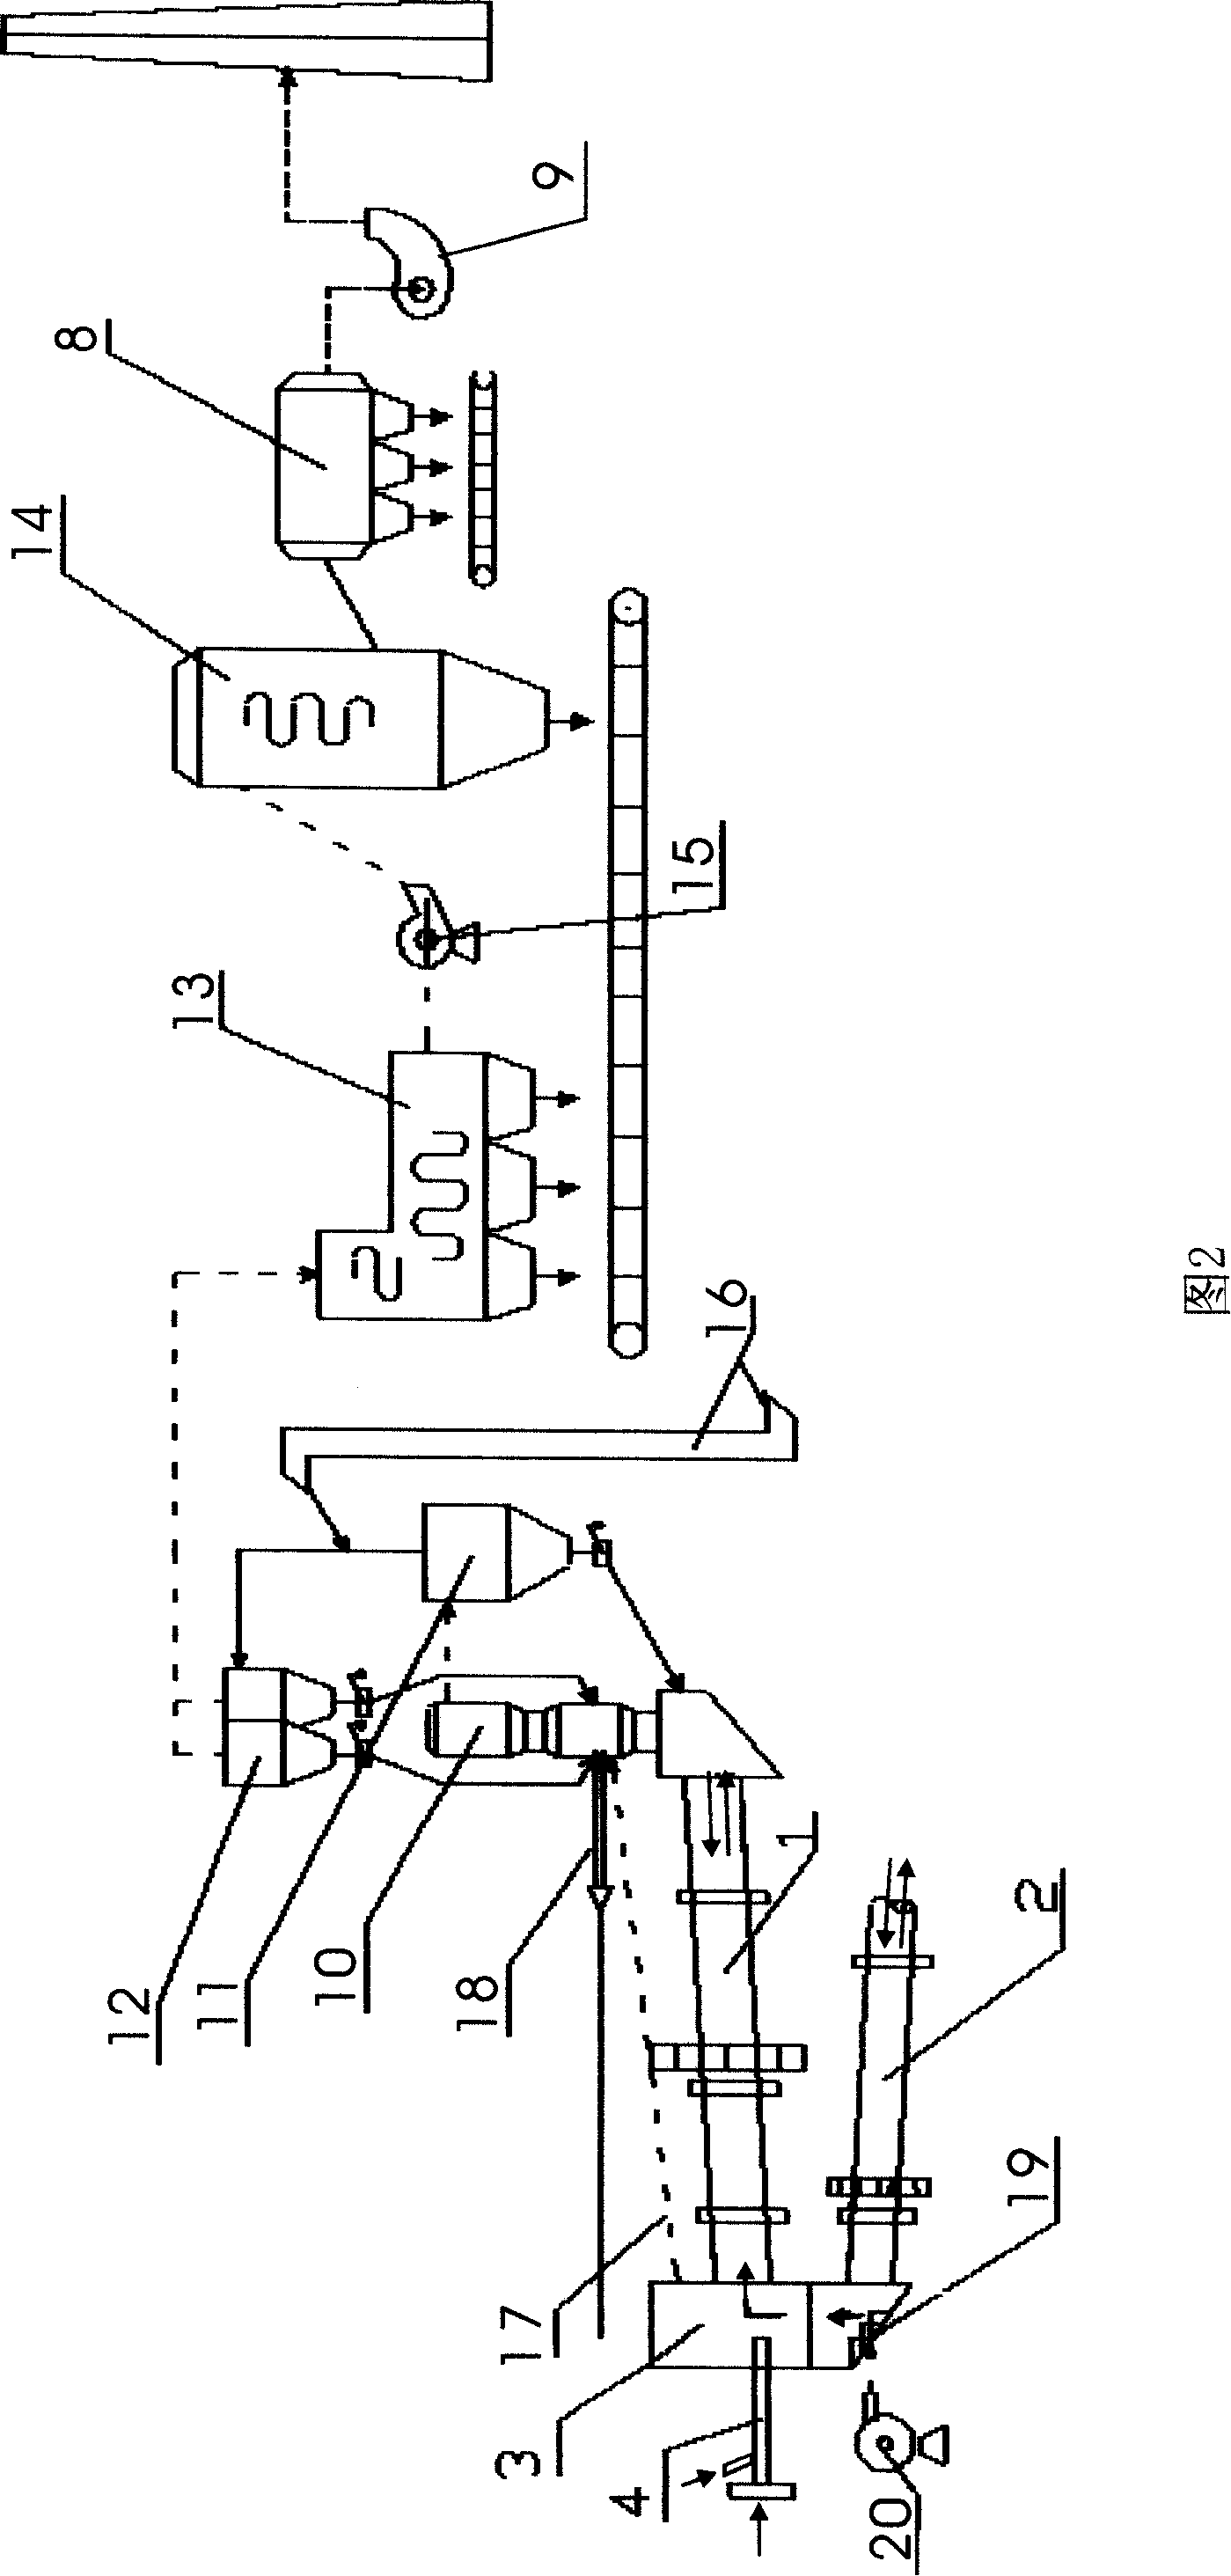 Novel combined cement clinker roasted and waste heat generation system and technique